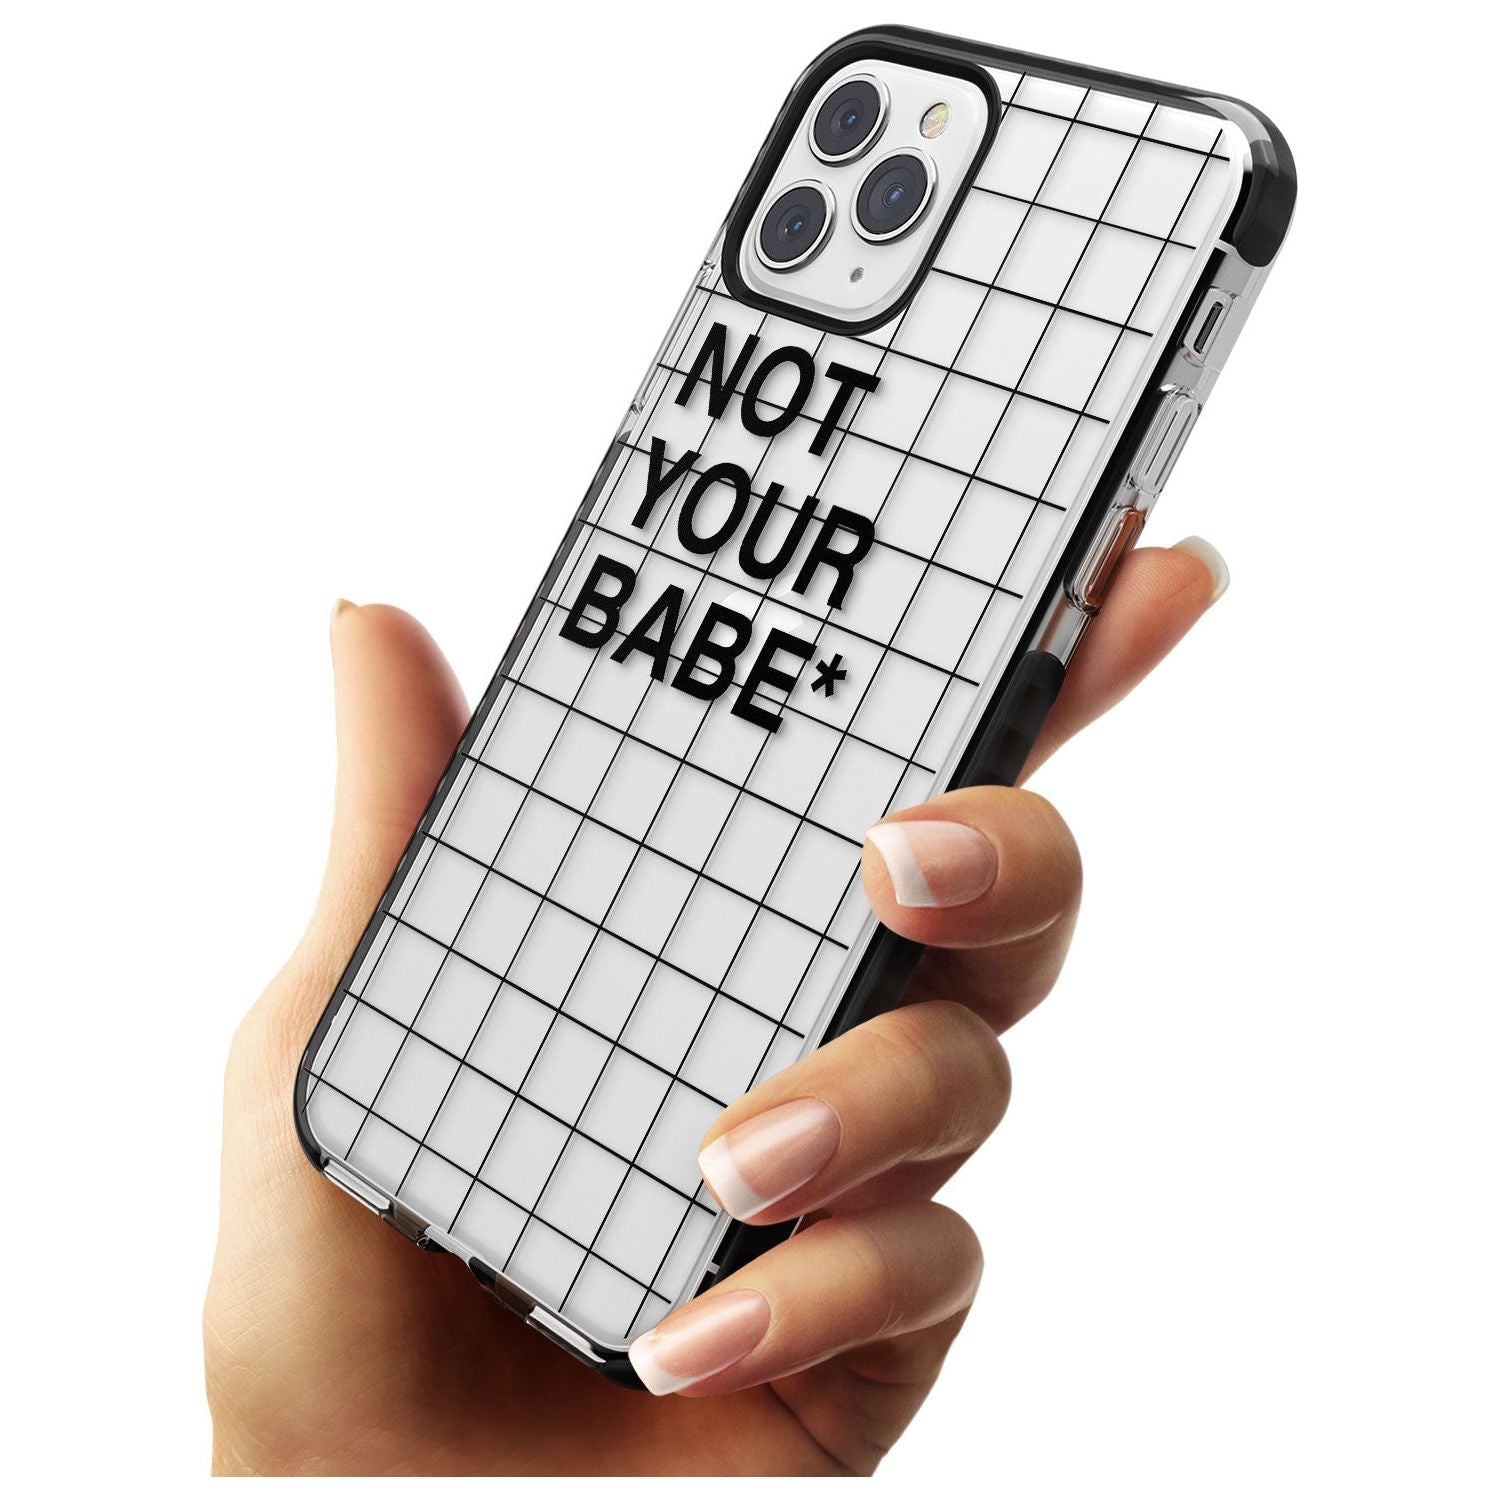 Grid Pattern Not Your Babe Black Impact Phone Case for iPhone 11 Pro Max